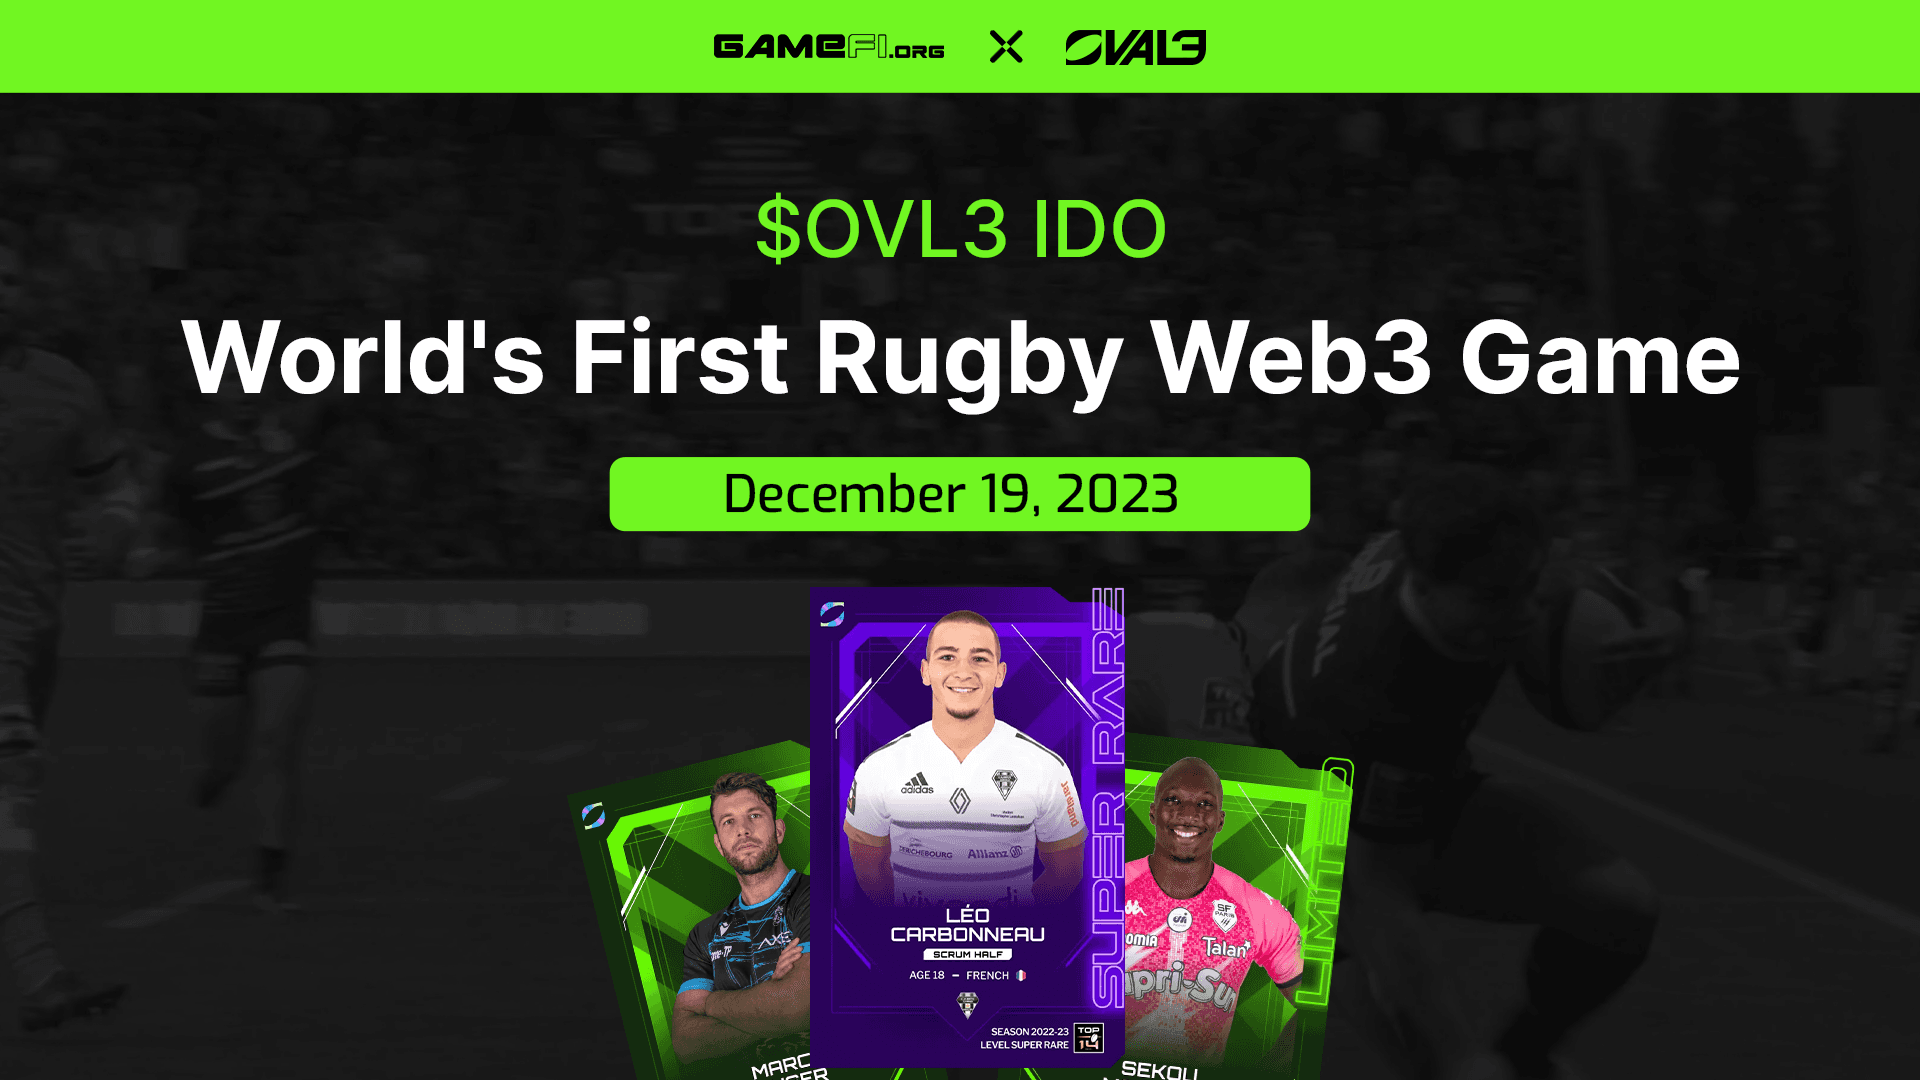 OVAL3 - World’s 1st Rugby Web3 Game offers $100,000 $OVL3 IDO on GameFi.org!